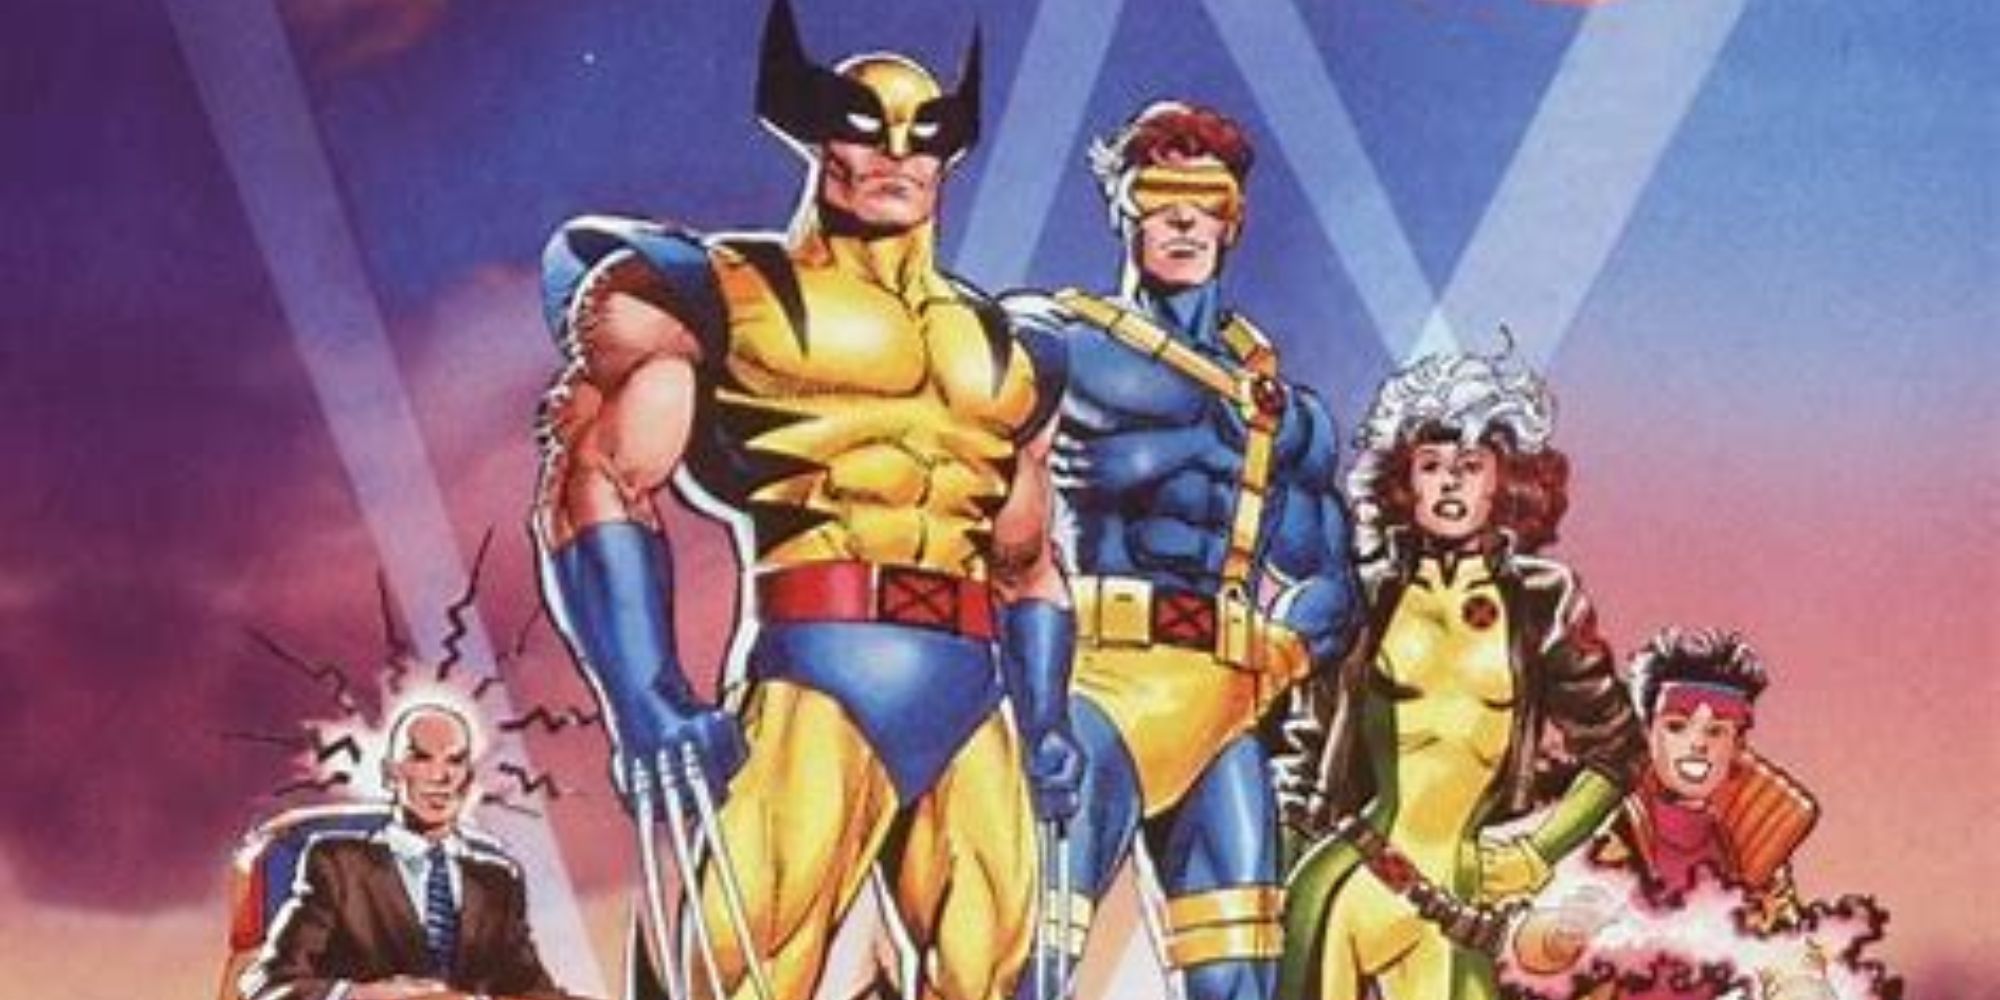 10 Best Episodes of X-Men: The Animated Series